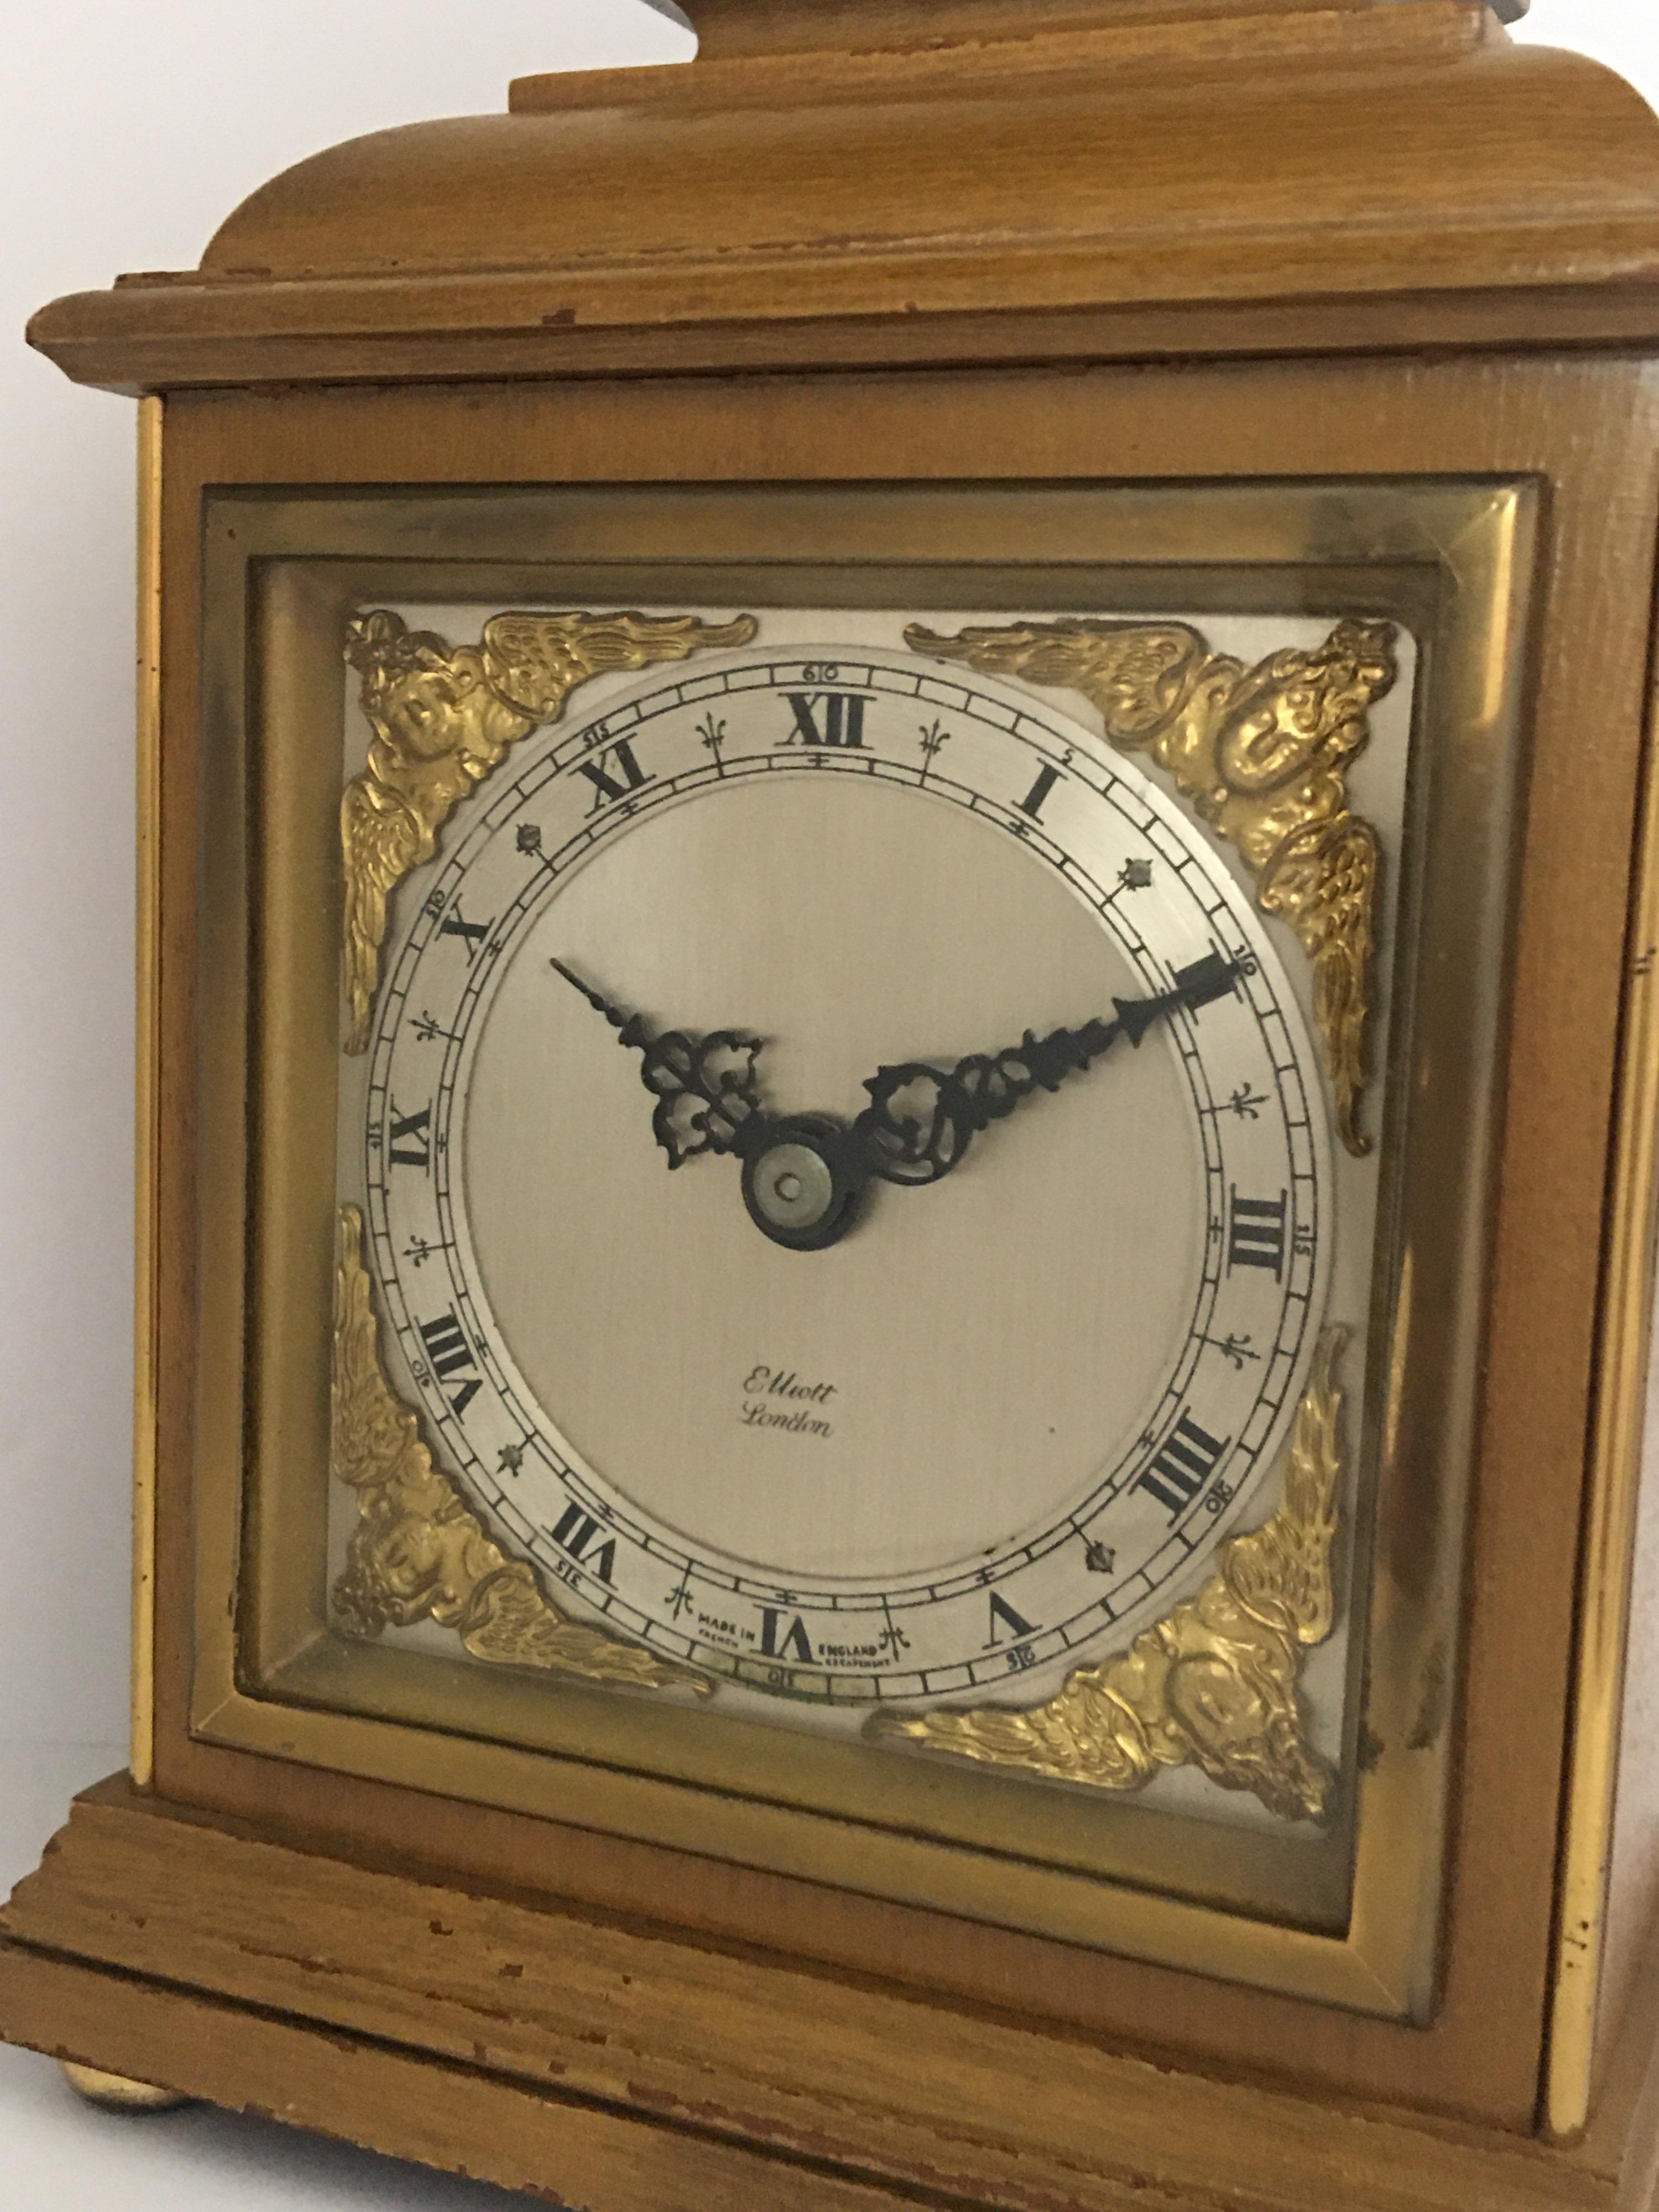 This beautiful 8th day mechanical English mantel clock is in good working condition and it is running well. Signed by Elliot London. Visible signs of ageing and wear with tiny light marks on the wooden case as shown. Please study the images